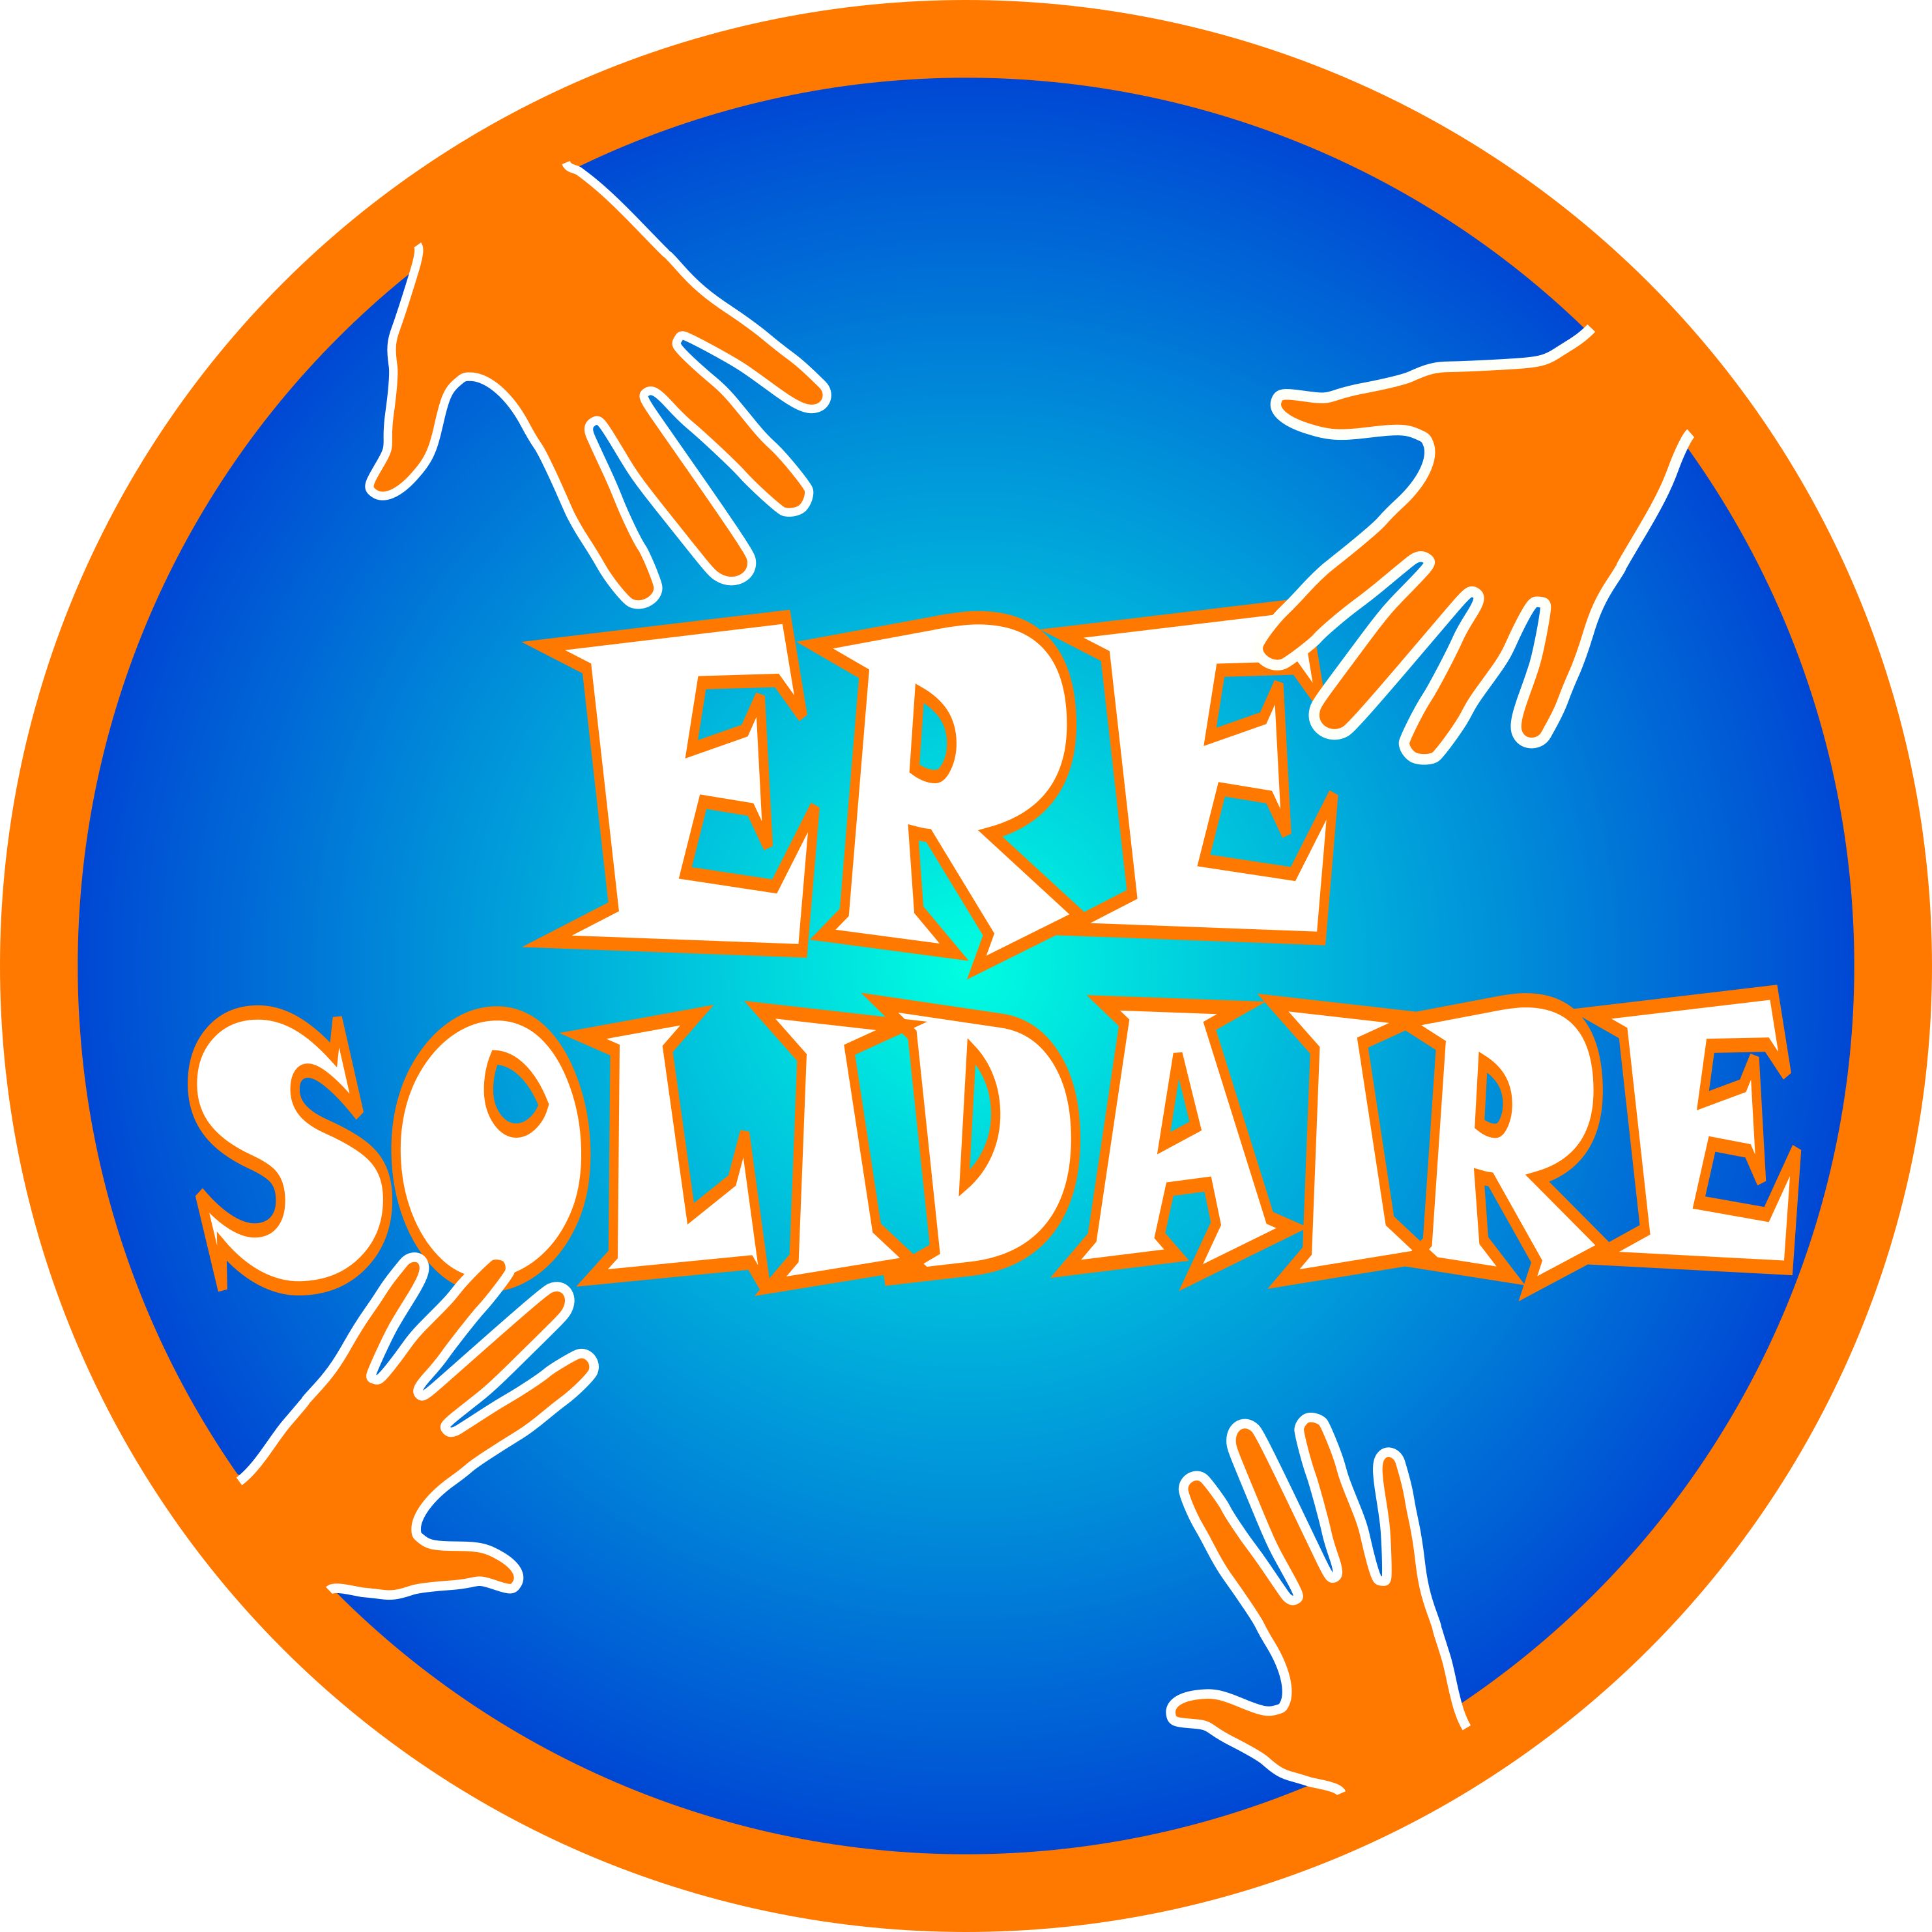 Ere Solidaire